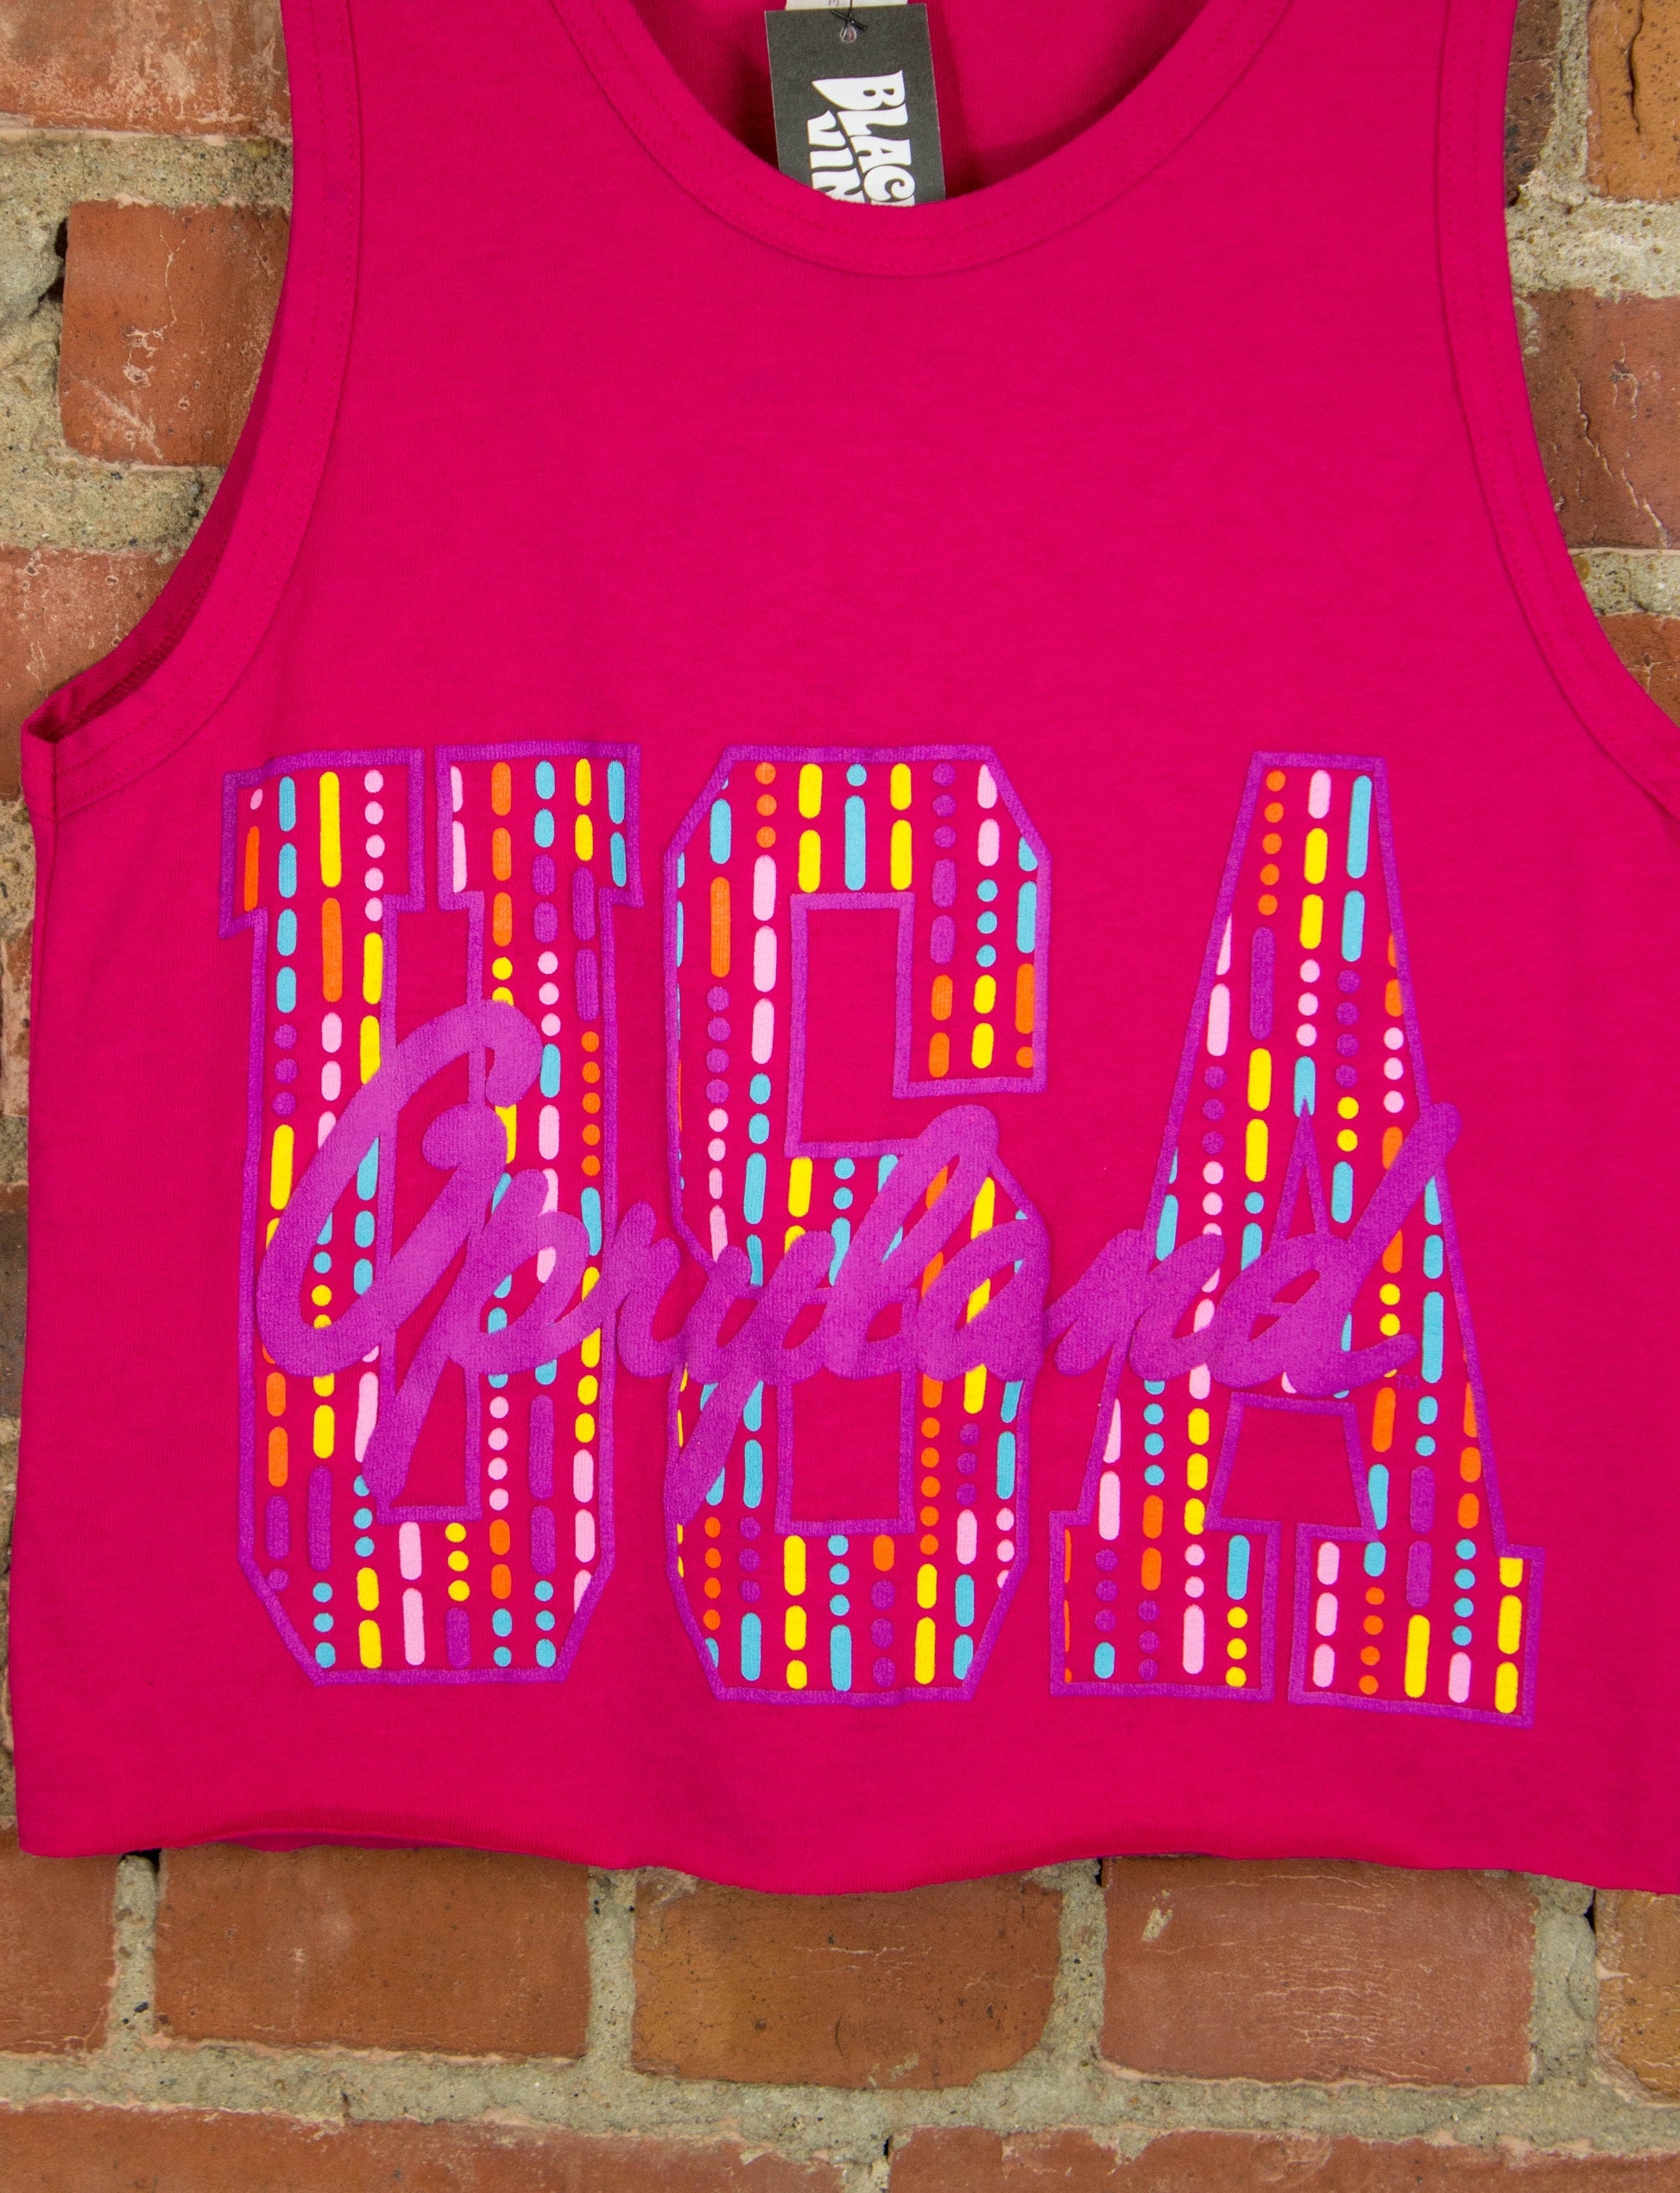 Vintage Opryland USA Cropped Graphic Tank Top 90s Puff Print Fuchsia Pink XS-Small